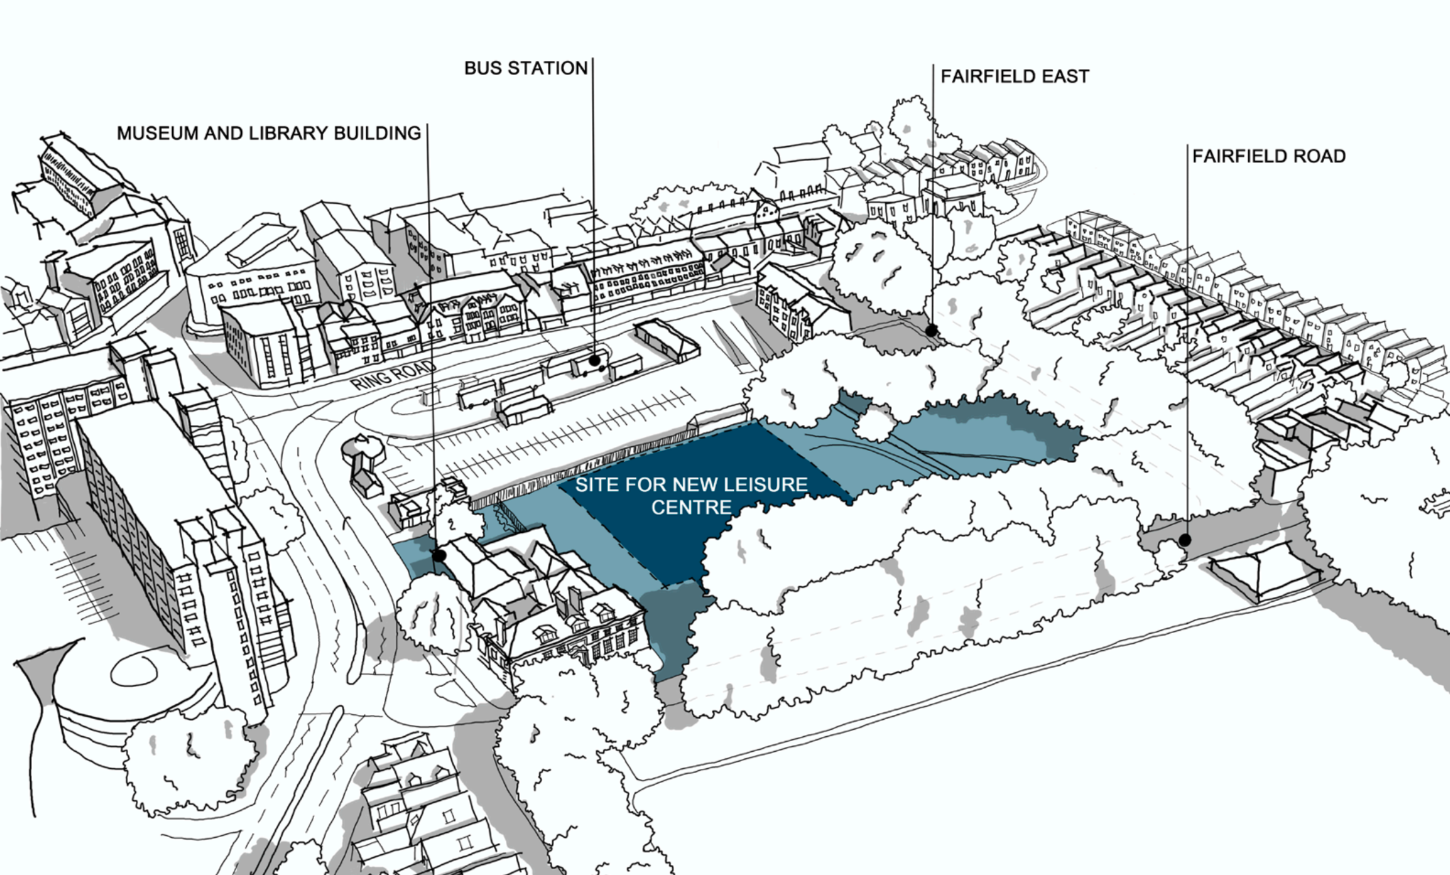 Image showing black and white map of the new leisure centre site and surrounding area, with the site to be developed shaded in blue.